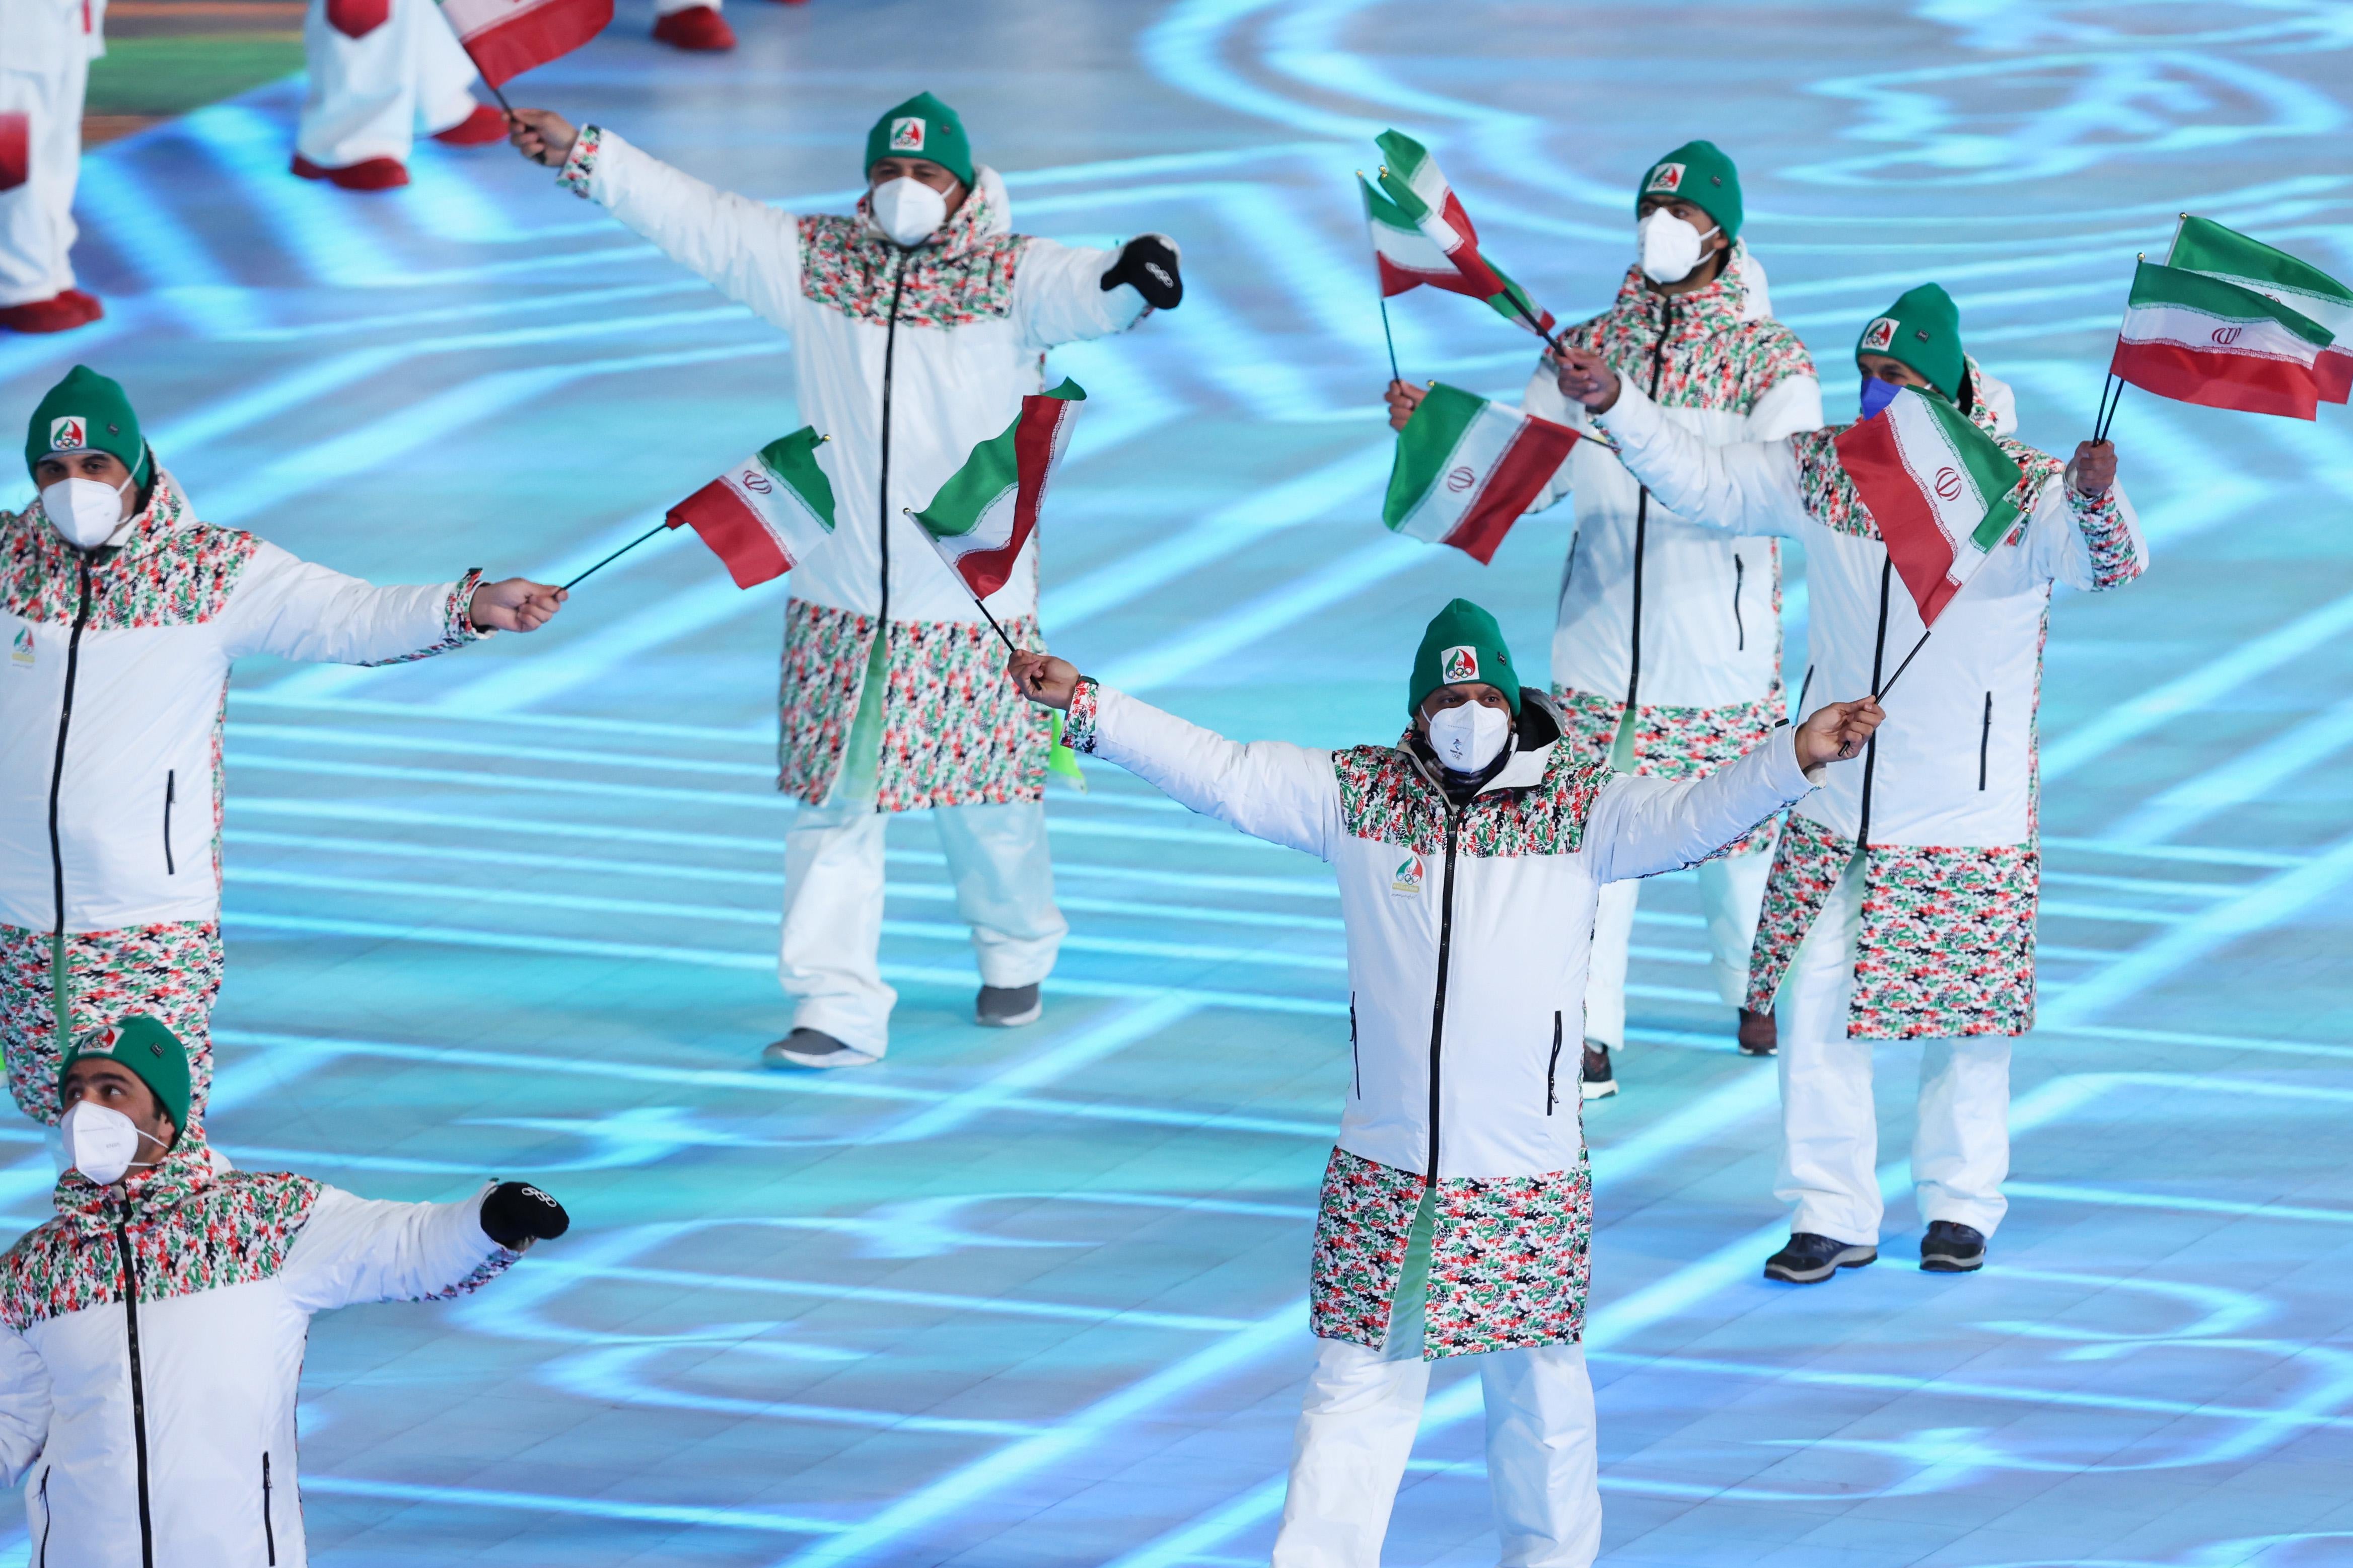 Team Iran walks with flags as a group.